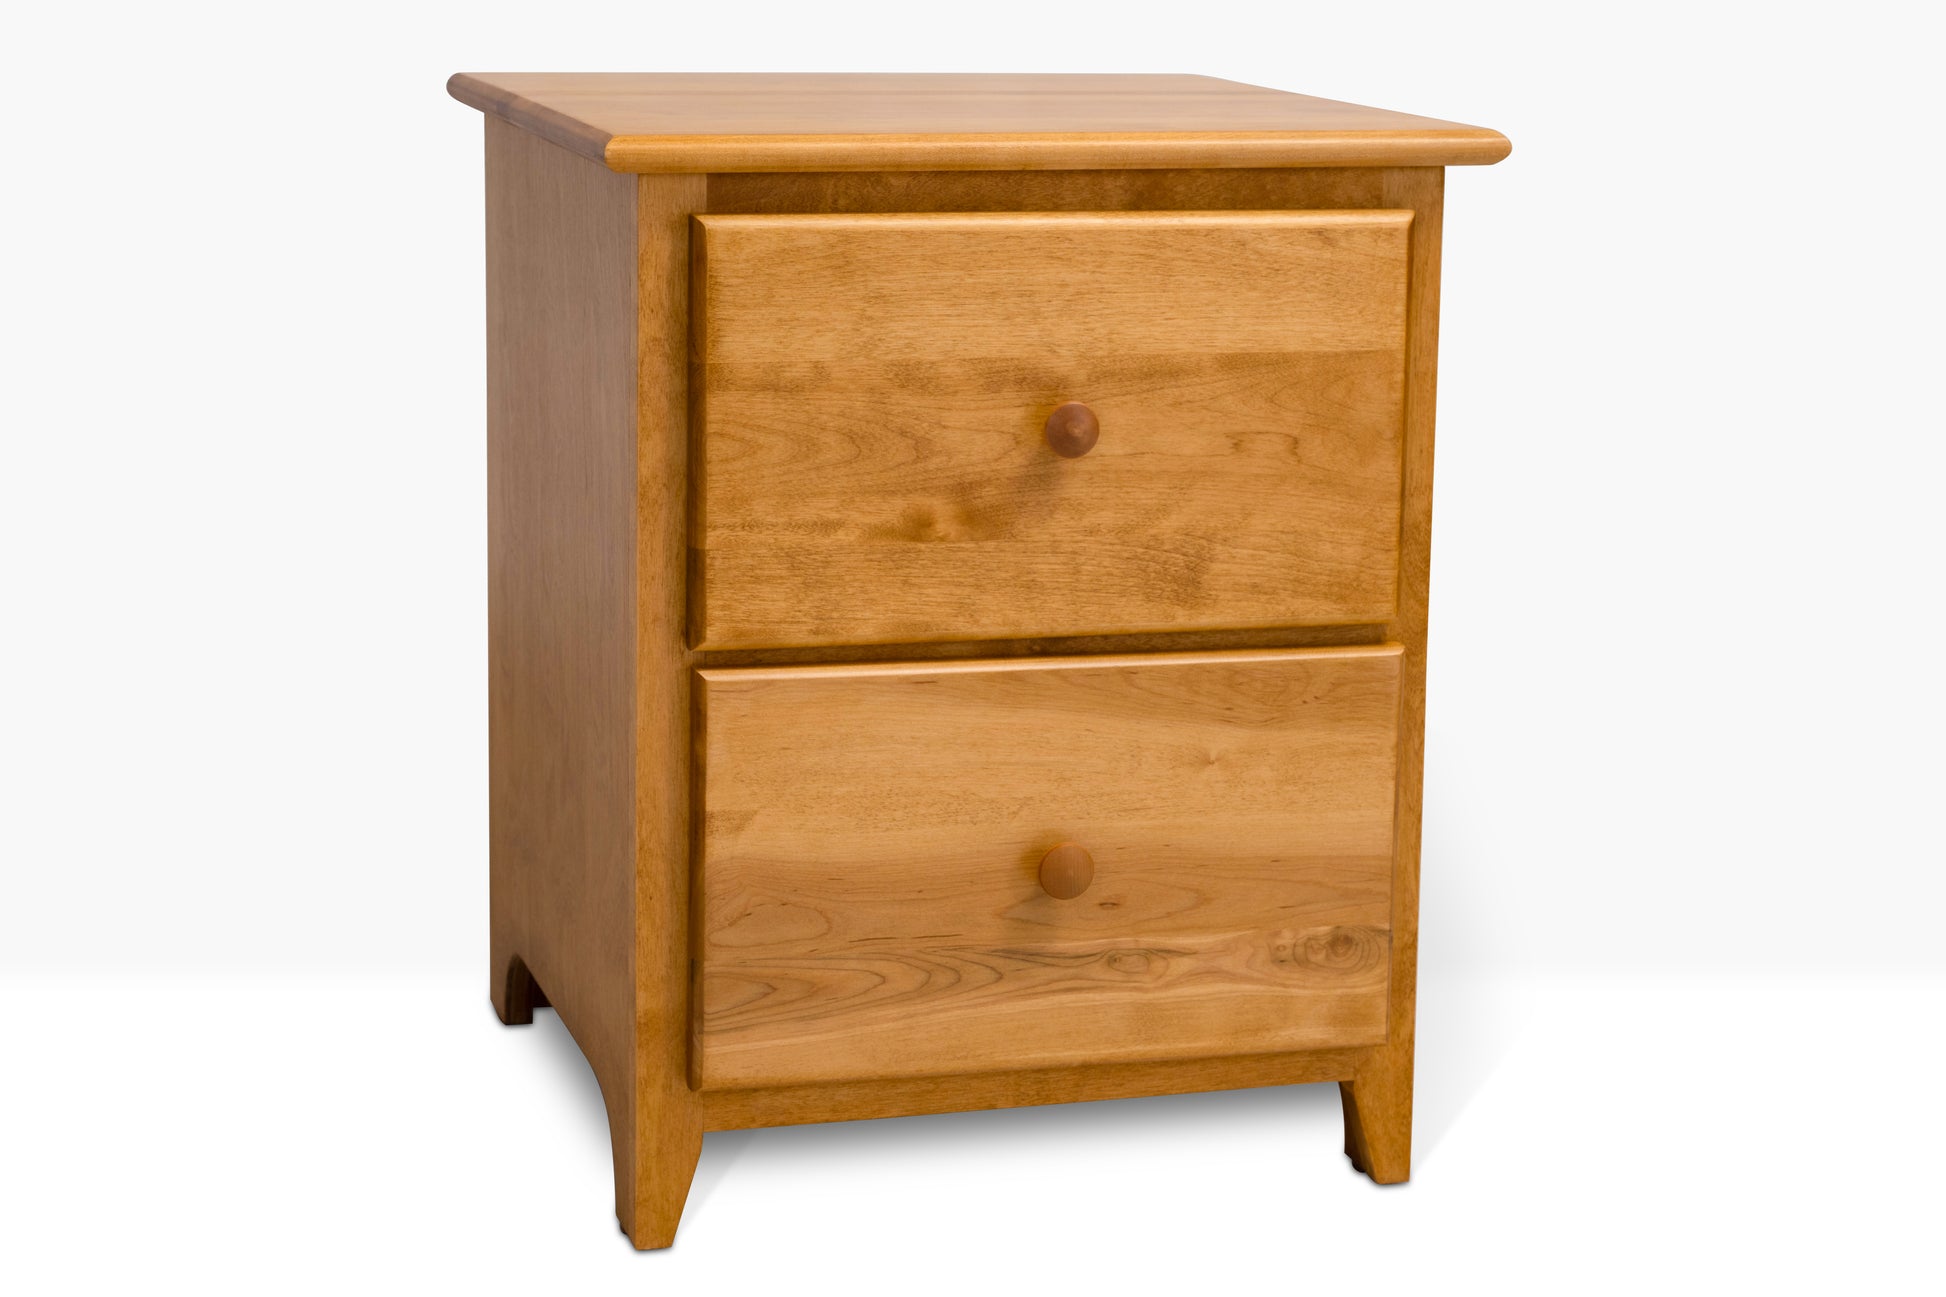 Acadia Shaker Two Drawer Nightstand is built from birch and features two drawers. Pictured in Autumn Gold finish from a side angle.